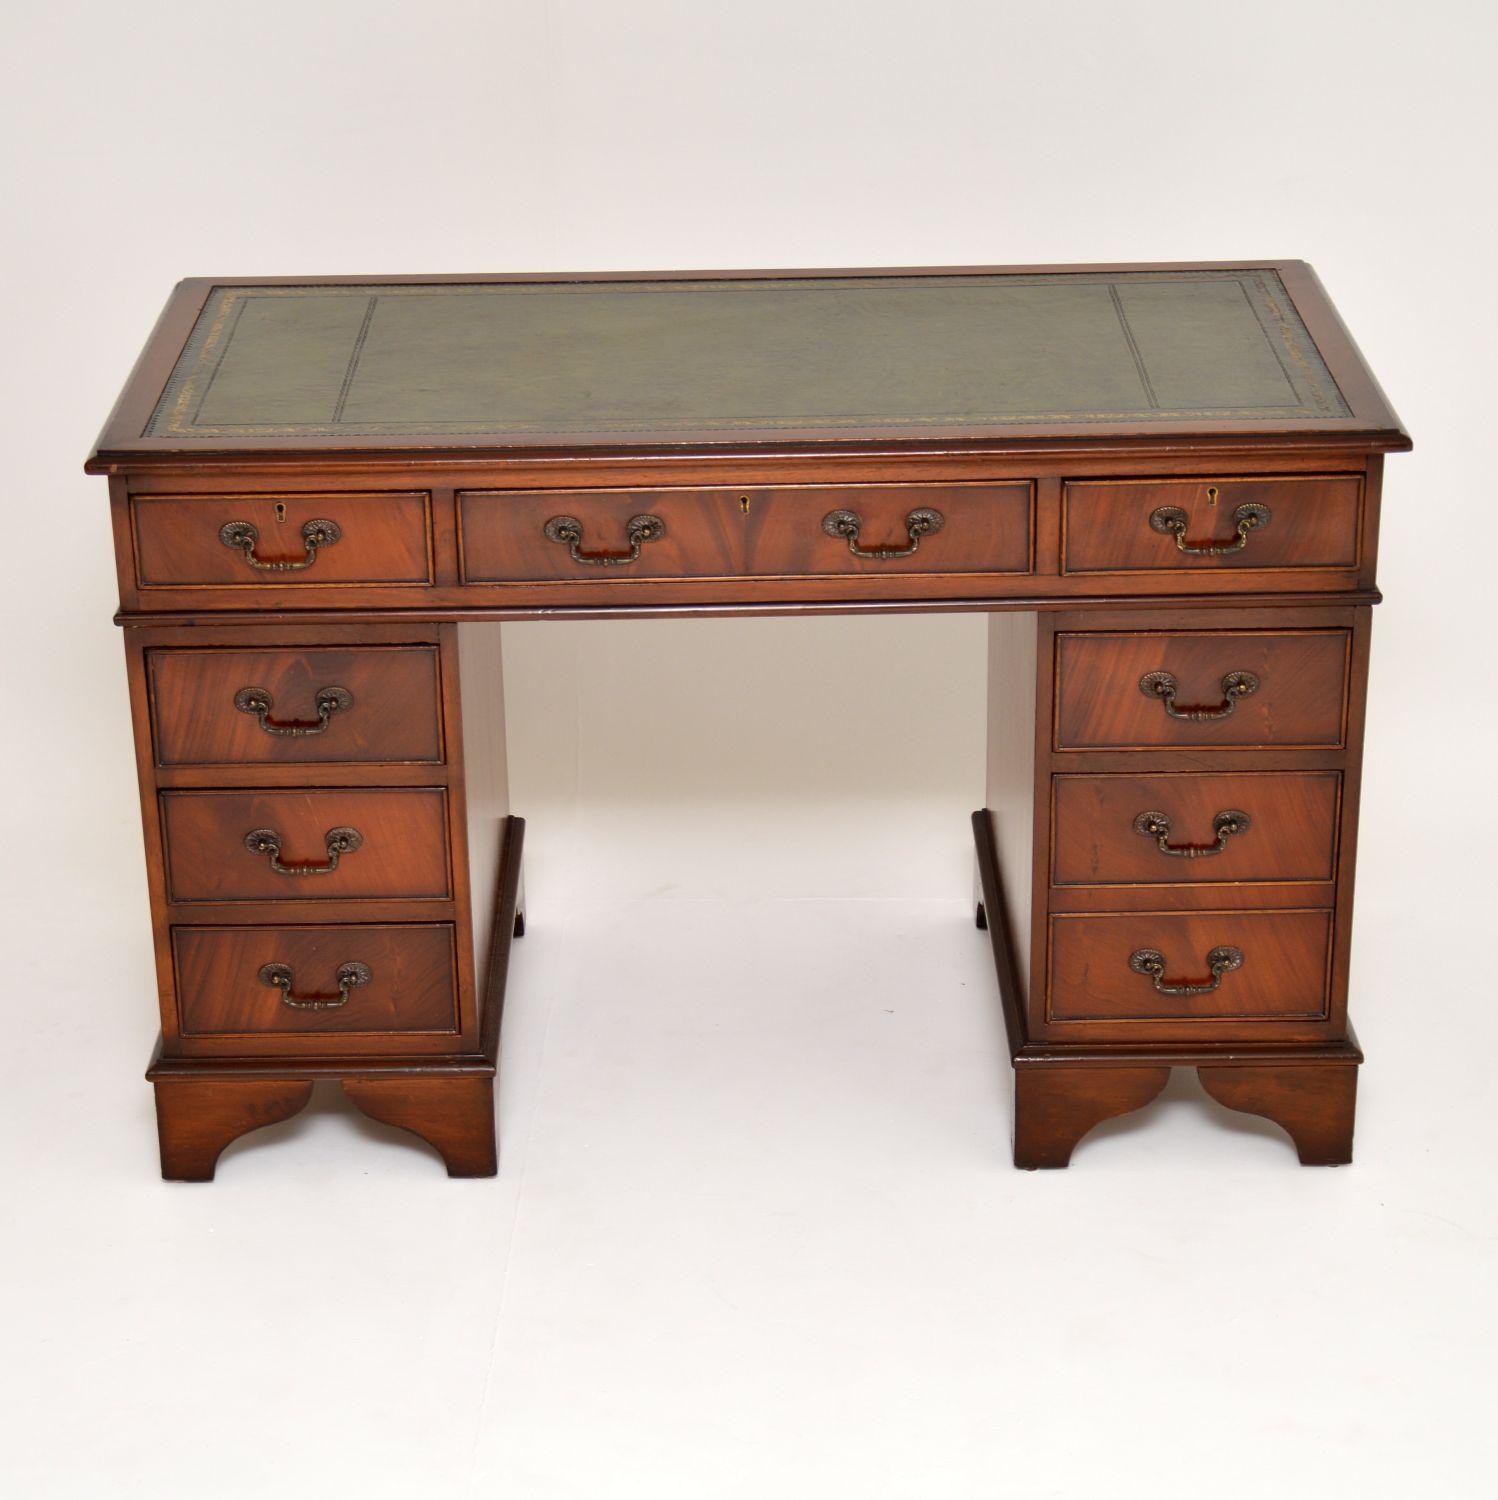 Antique Georgian style mahogany leather top pedestal desk in very good original condition and dating to circa 1950s period. This is a very well constructed desk that separates into three sections for easy transportation. It has a hand gold tooled